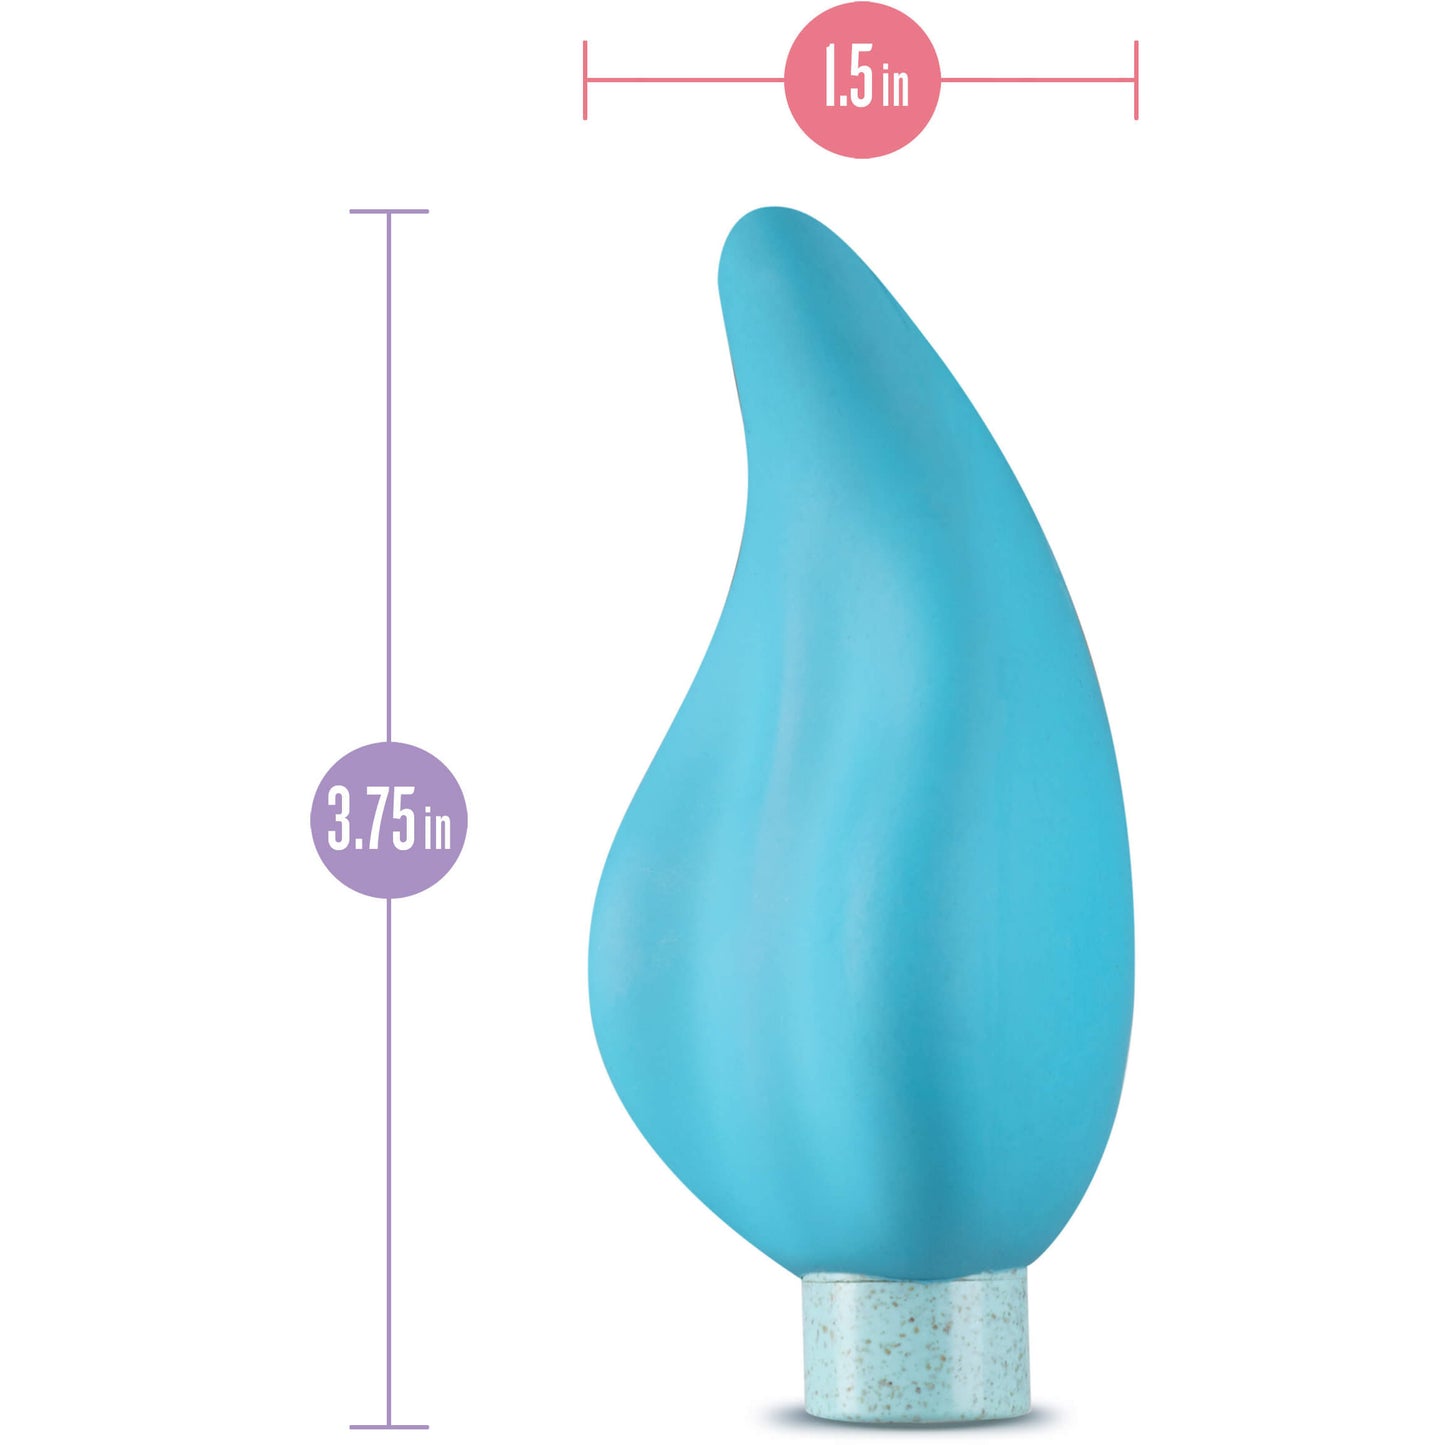 Blush Gaia Eco Caress measurements - by The Bigger O online sex toy shop. USA, Canada and UK shipping available.